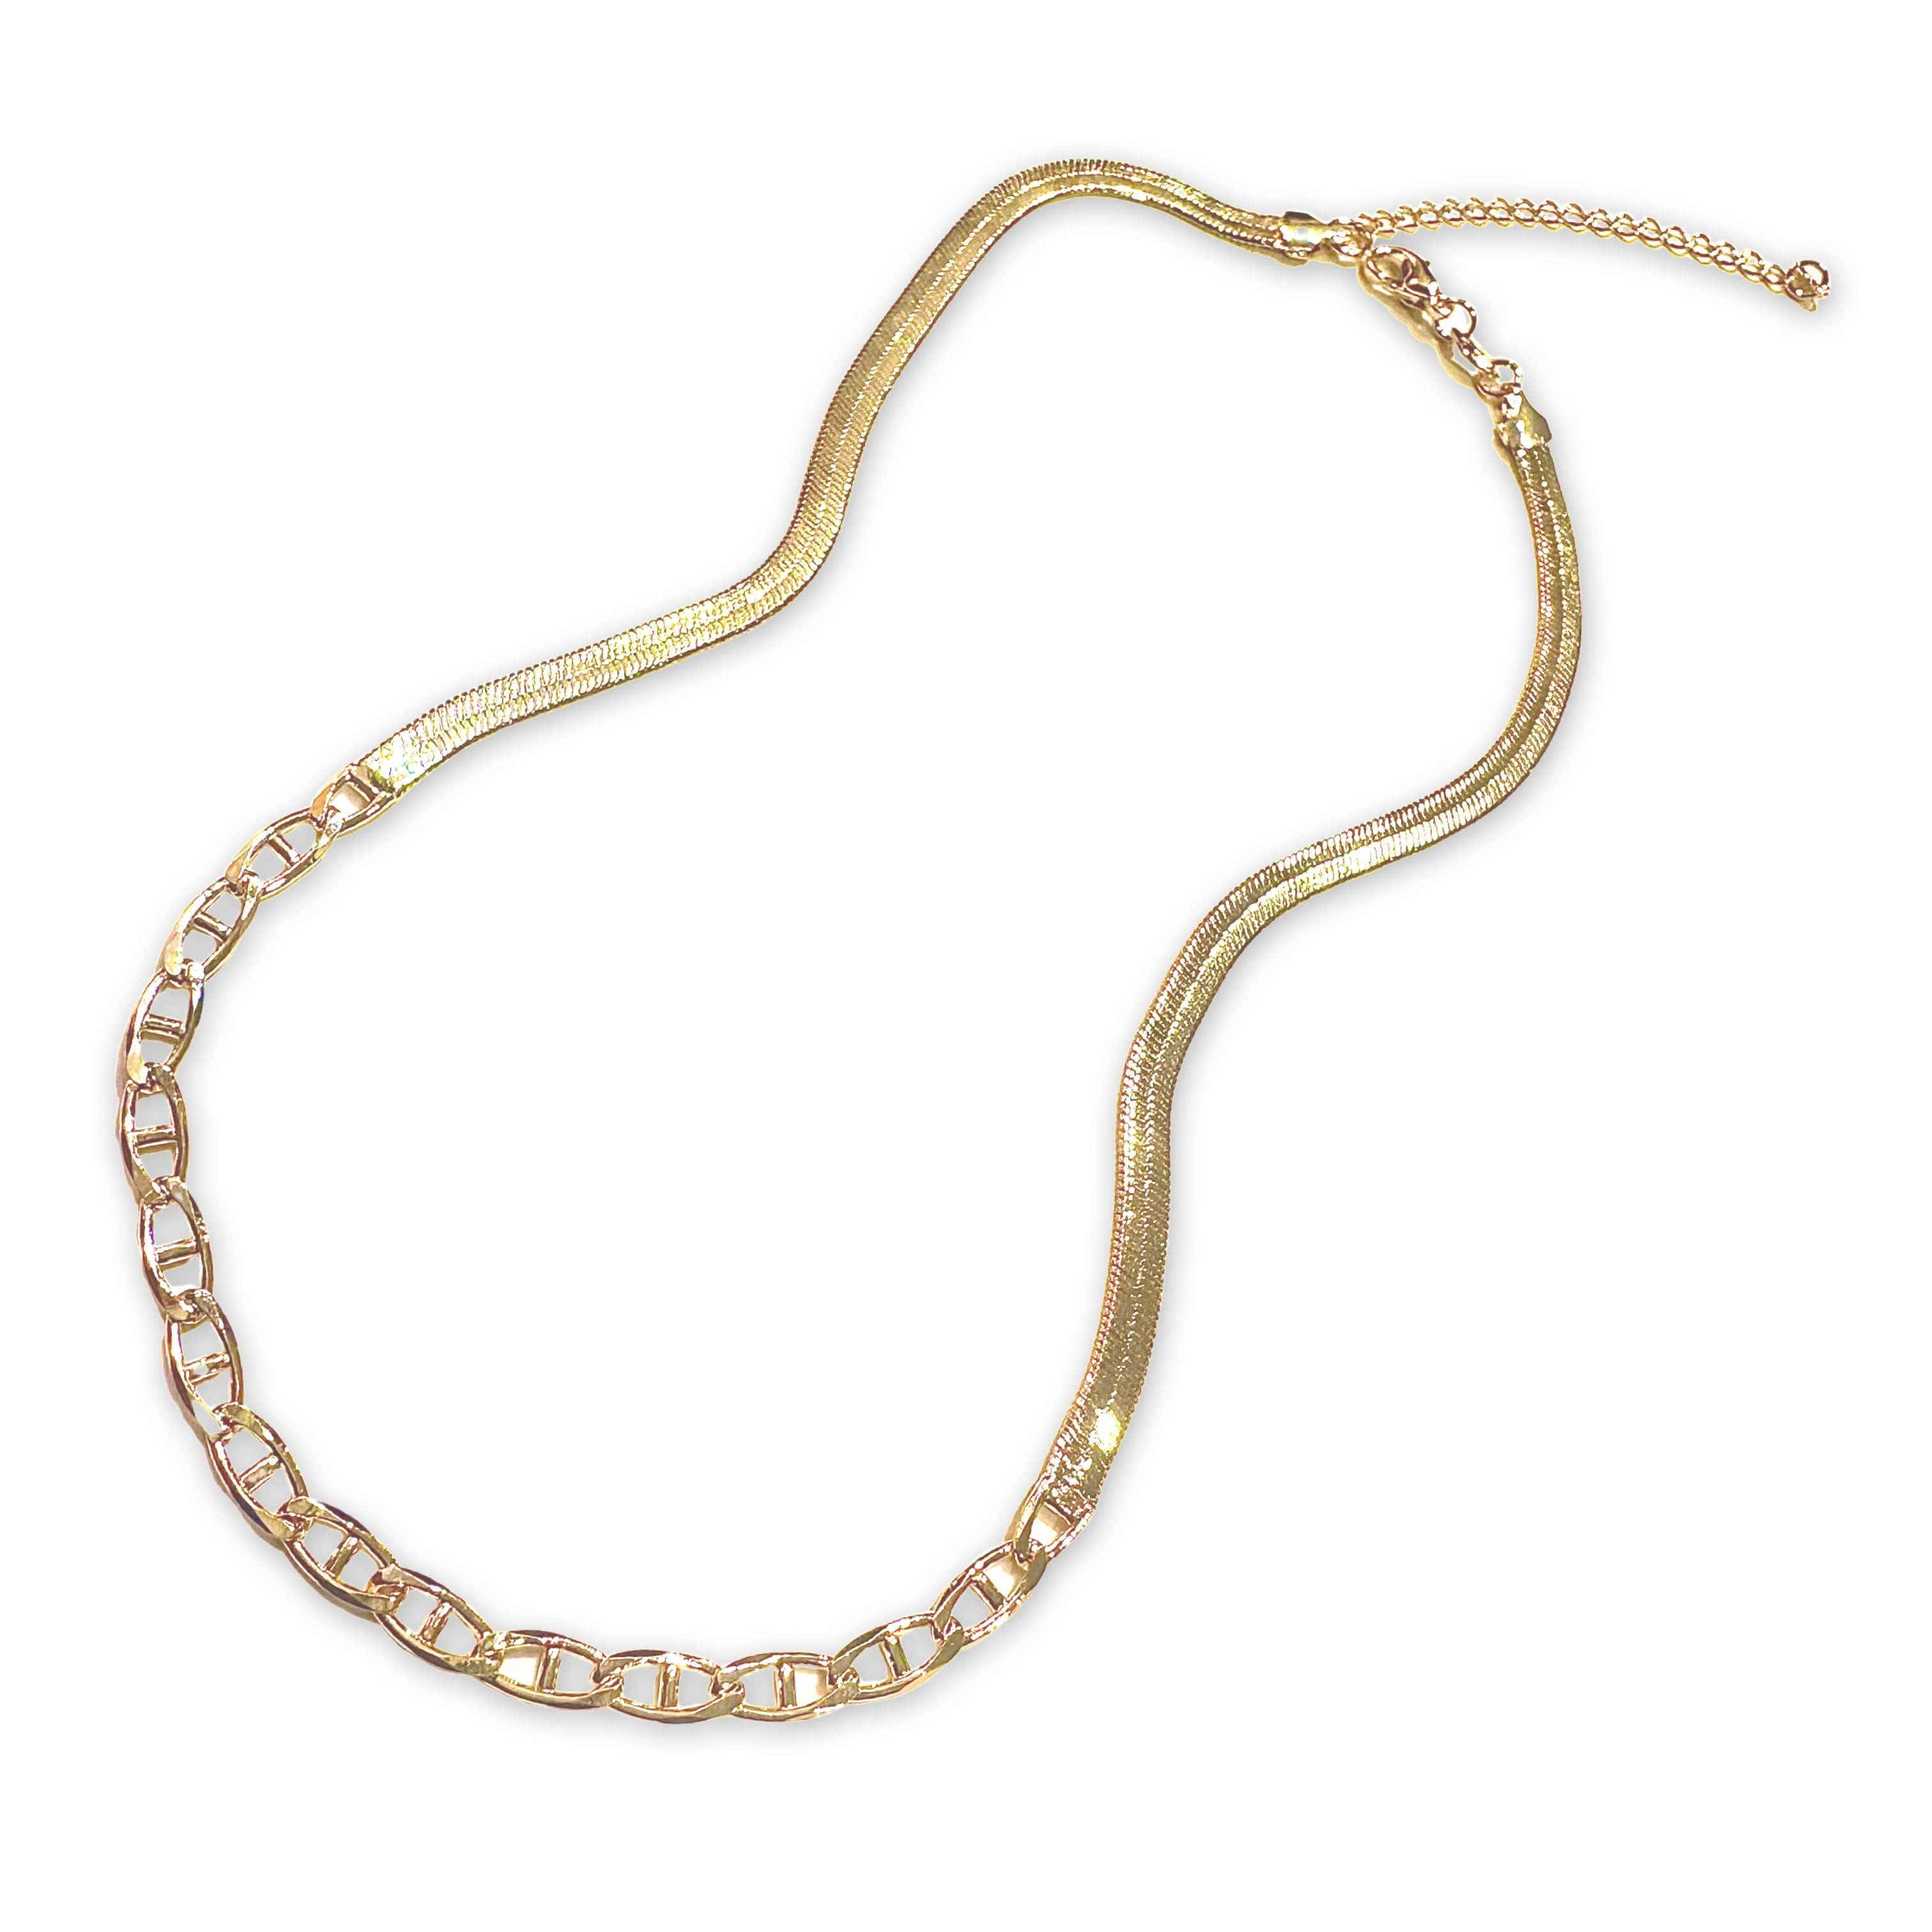 18K Gold Filled Mixed Herringbone 4mm Chain Necklace